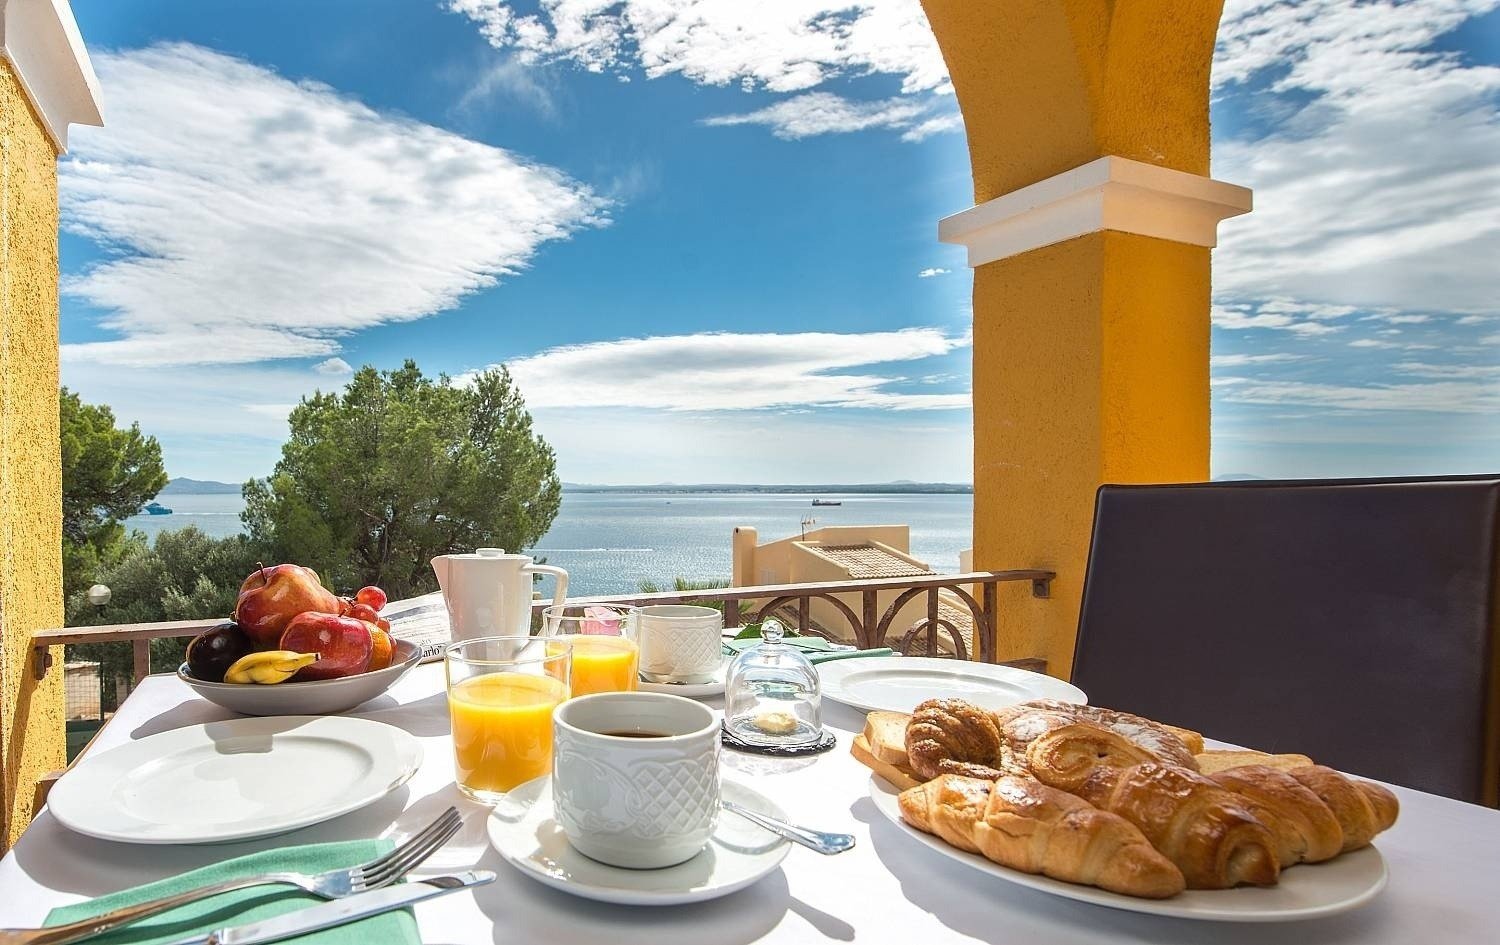 Have breakfast on the terrace at the Ona Aucanada hotel in the north of Mallorca